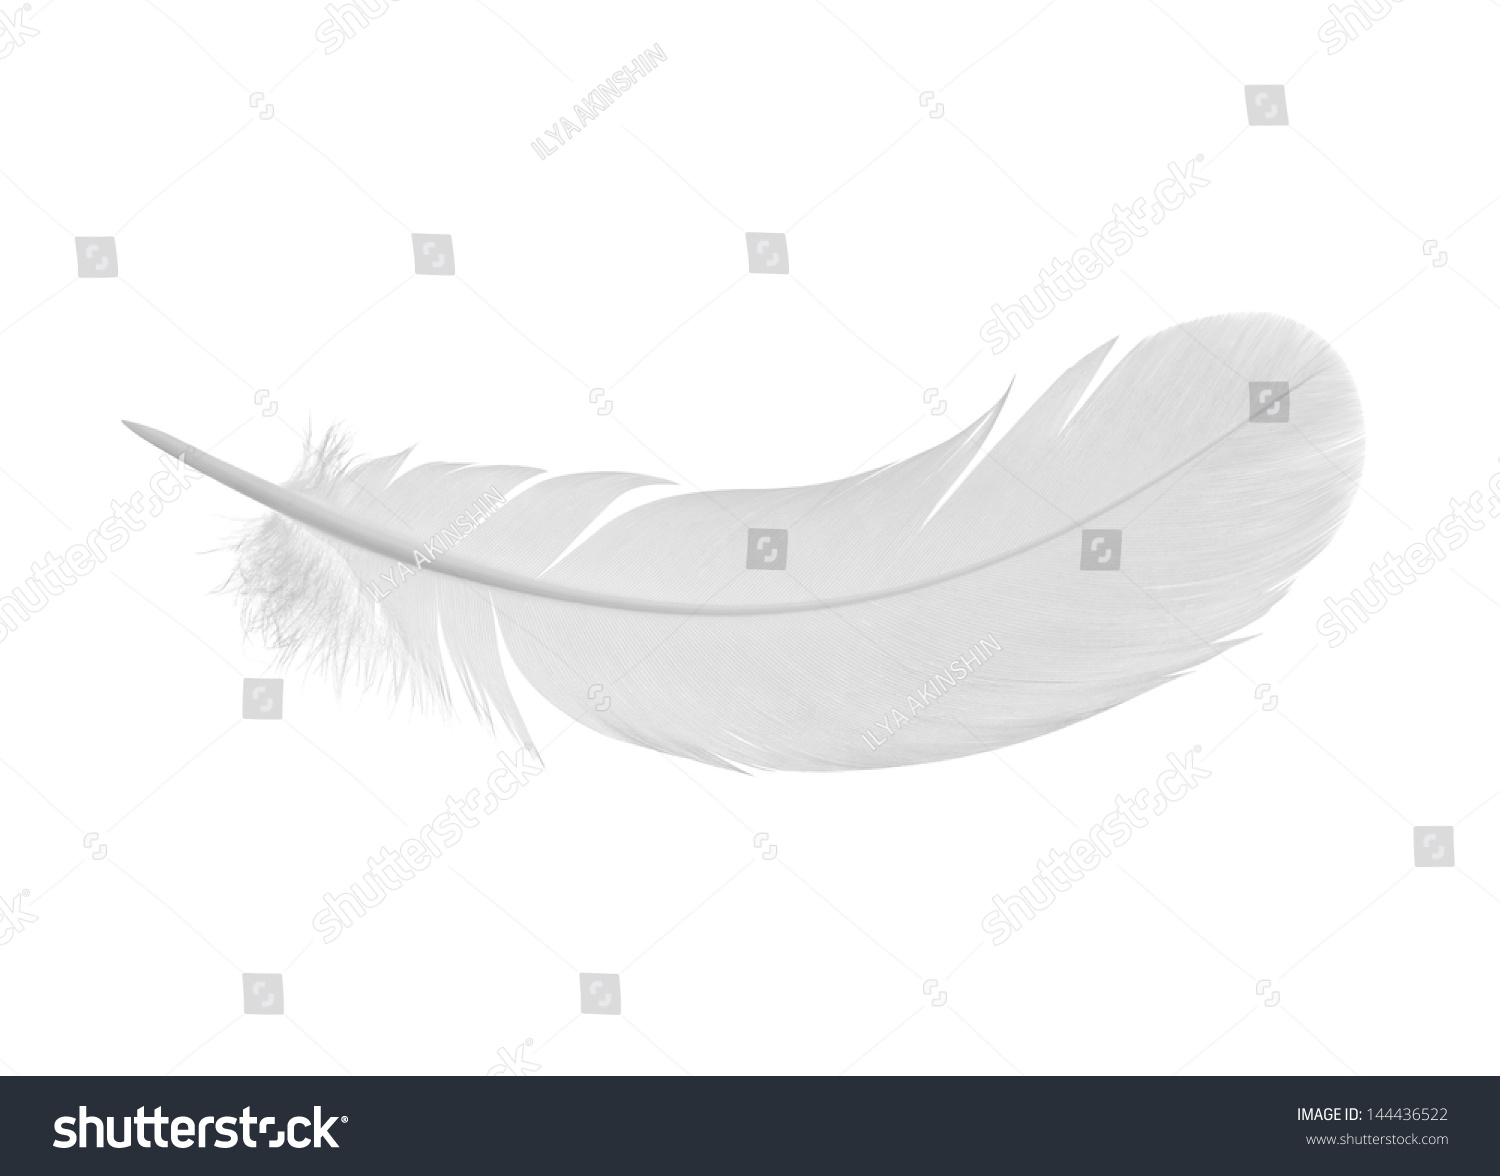 feather on a white background #144436522